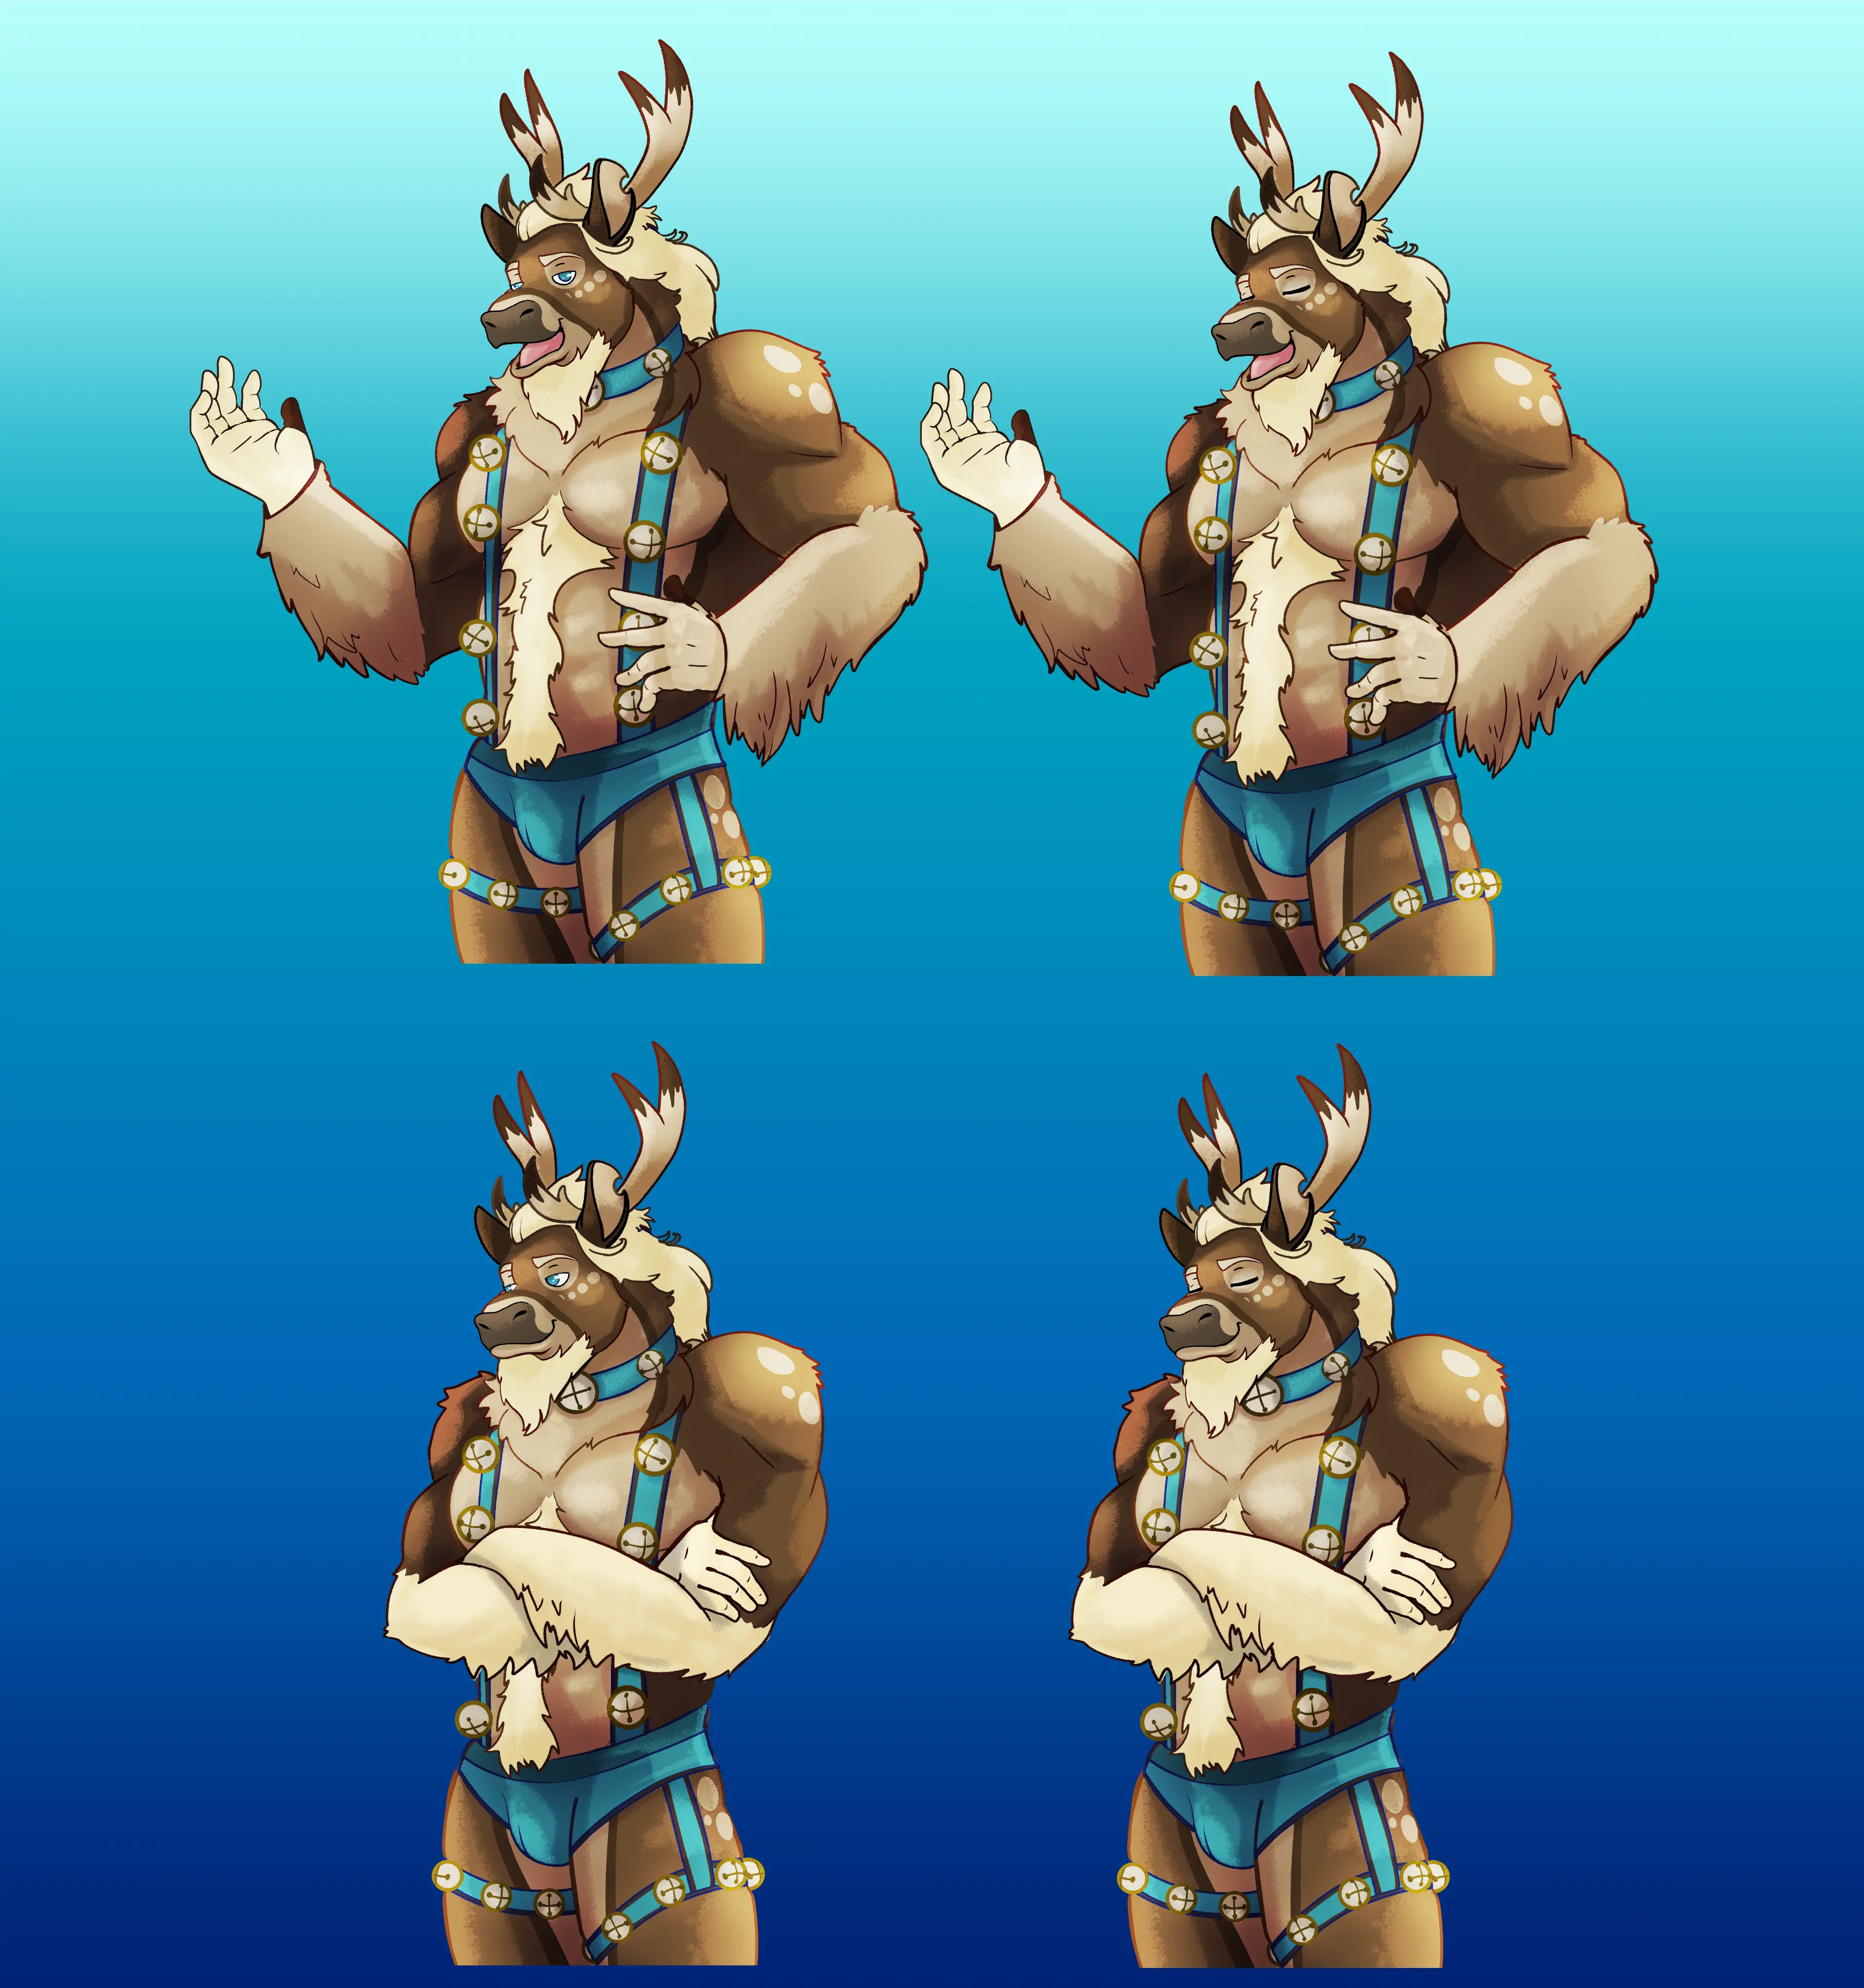 domthereindeer pngs final.png